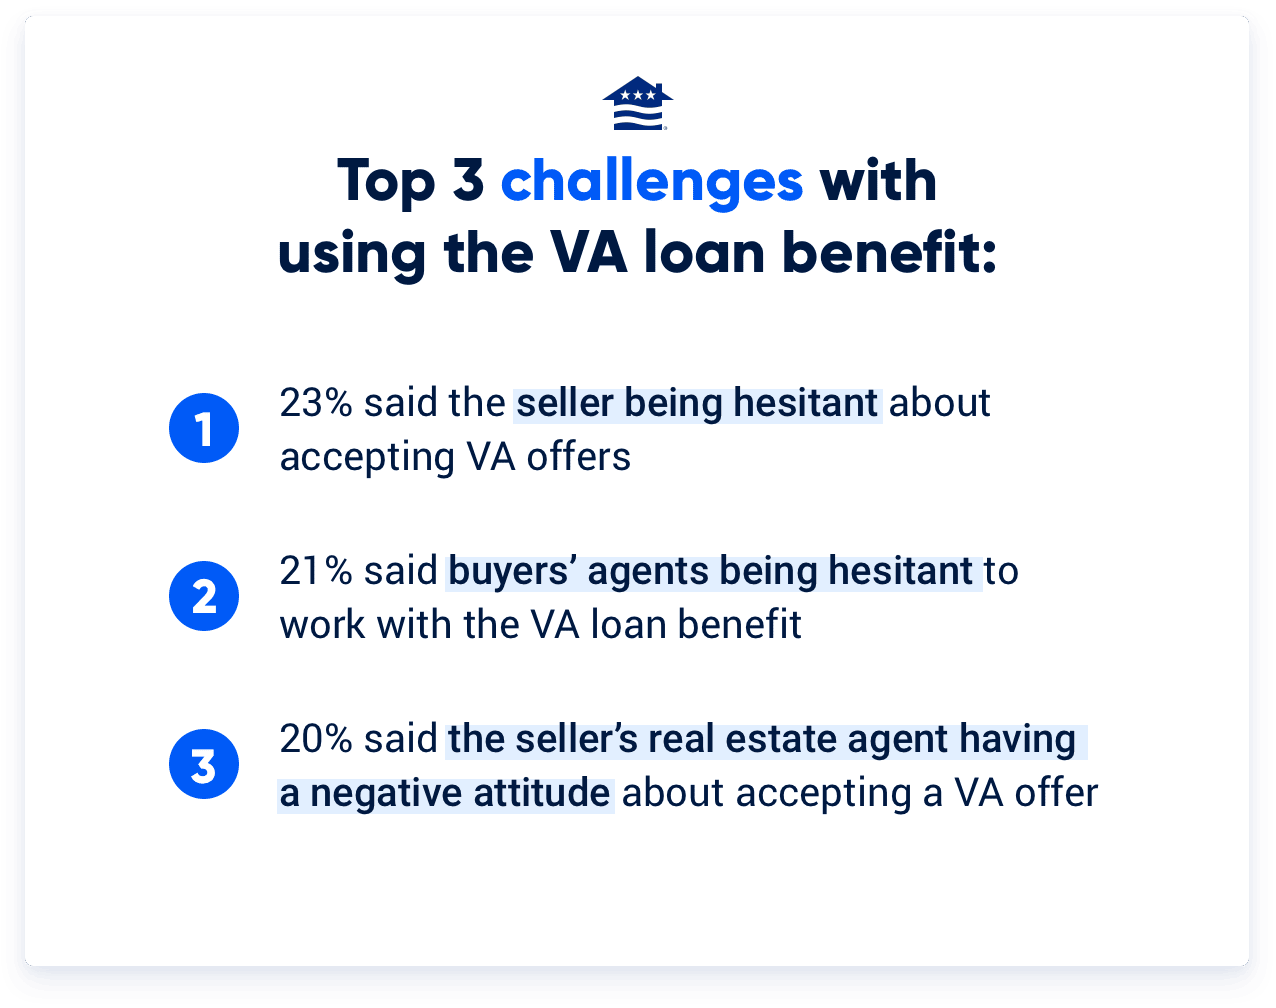 Other challenges and improvement areas highlight the outsized role that real estate agents and home sellers can play when it comes to whether Veterans can compete with their earned benefit.